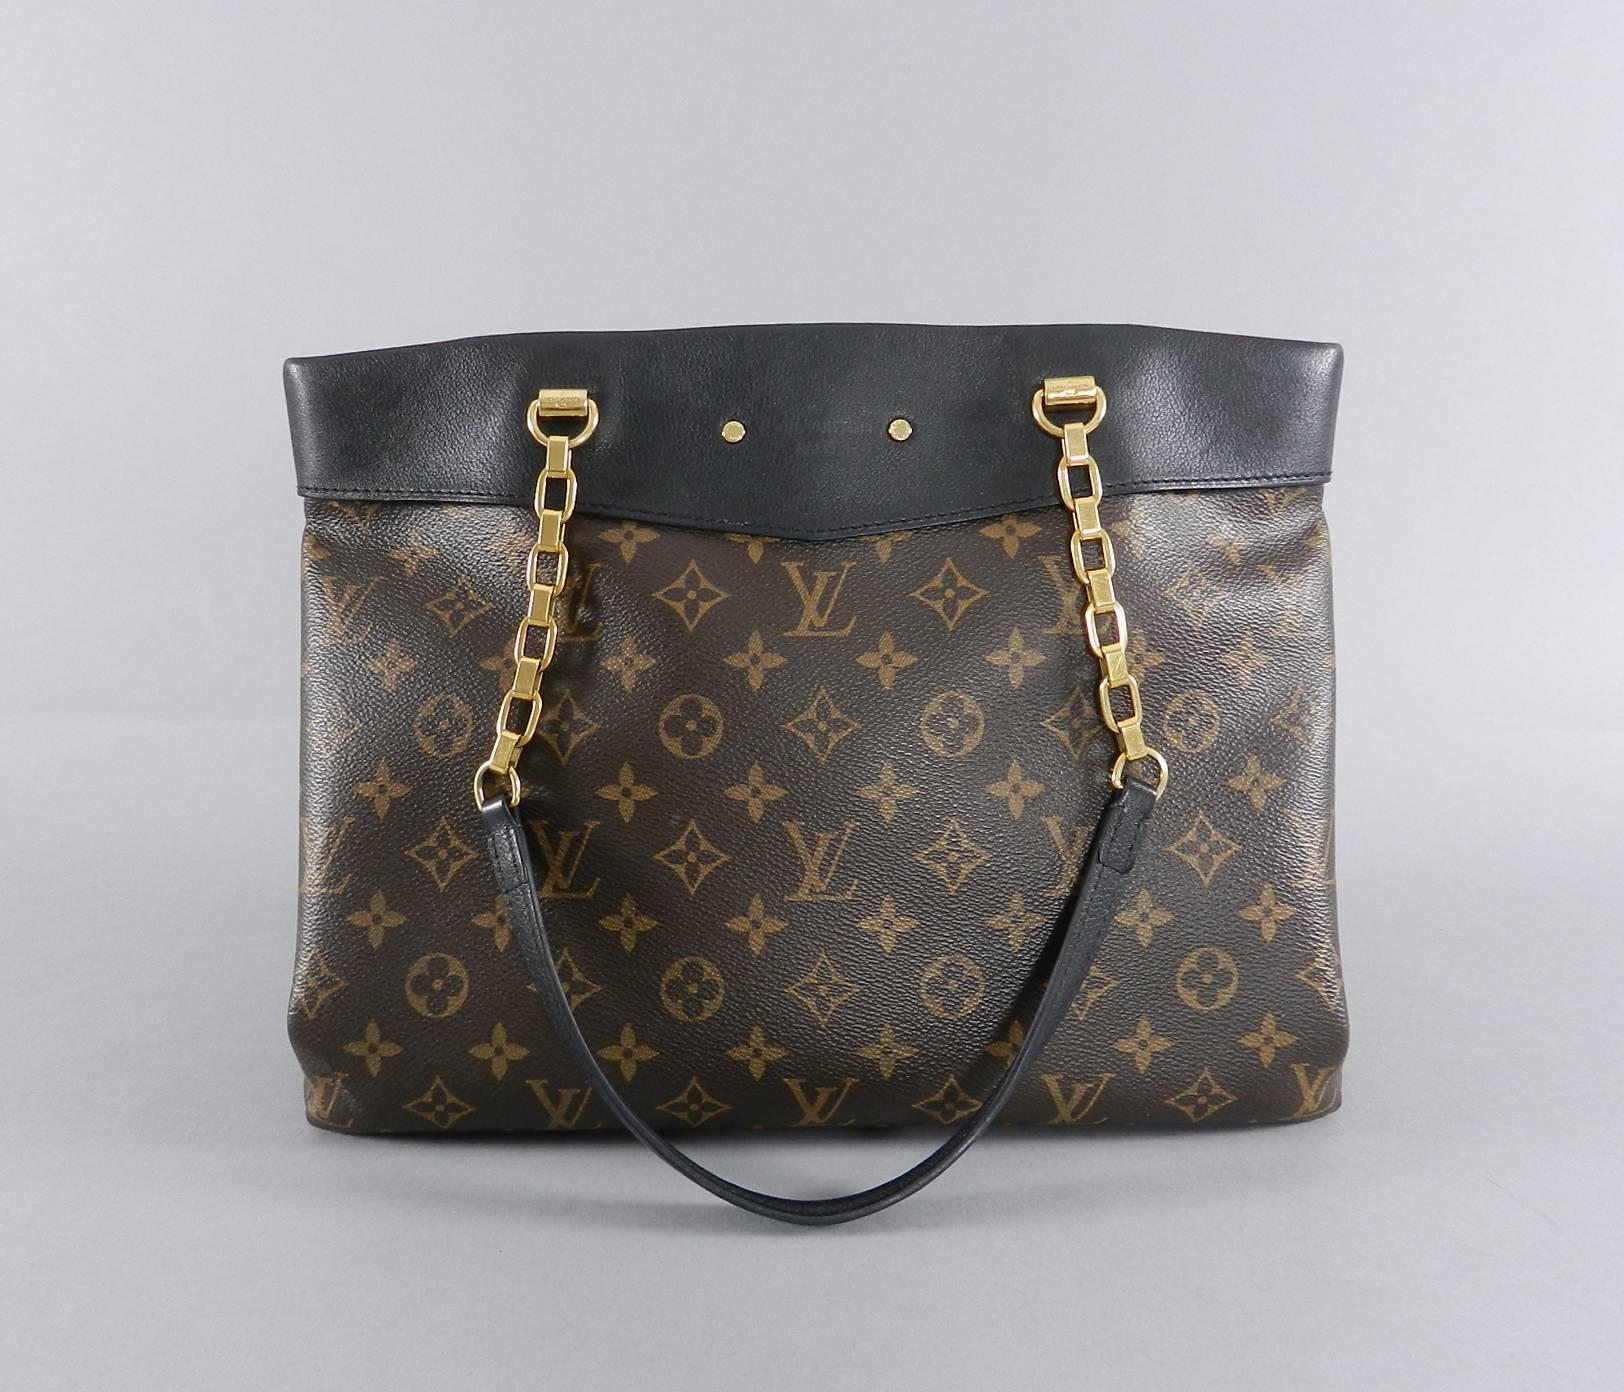 Louis Vuitton Pallas Shopper Bag - Monogram canvas and black.  Measures 13.5 x 9.75 x 6" with a 9.75" drop.  Excellent pre-owned condition.  Clochette is missing, some wear to metal bottom feet and metal interior zipper pull as pictured.